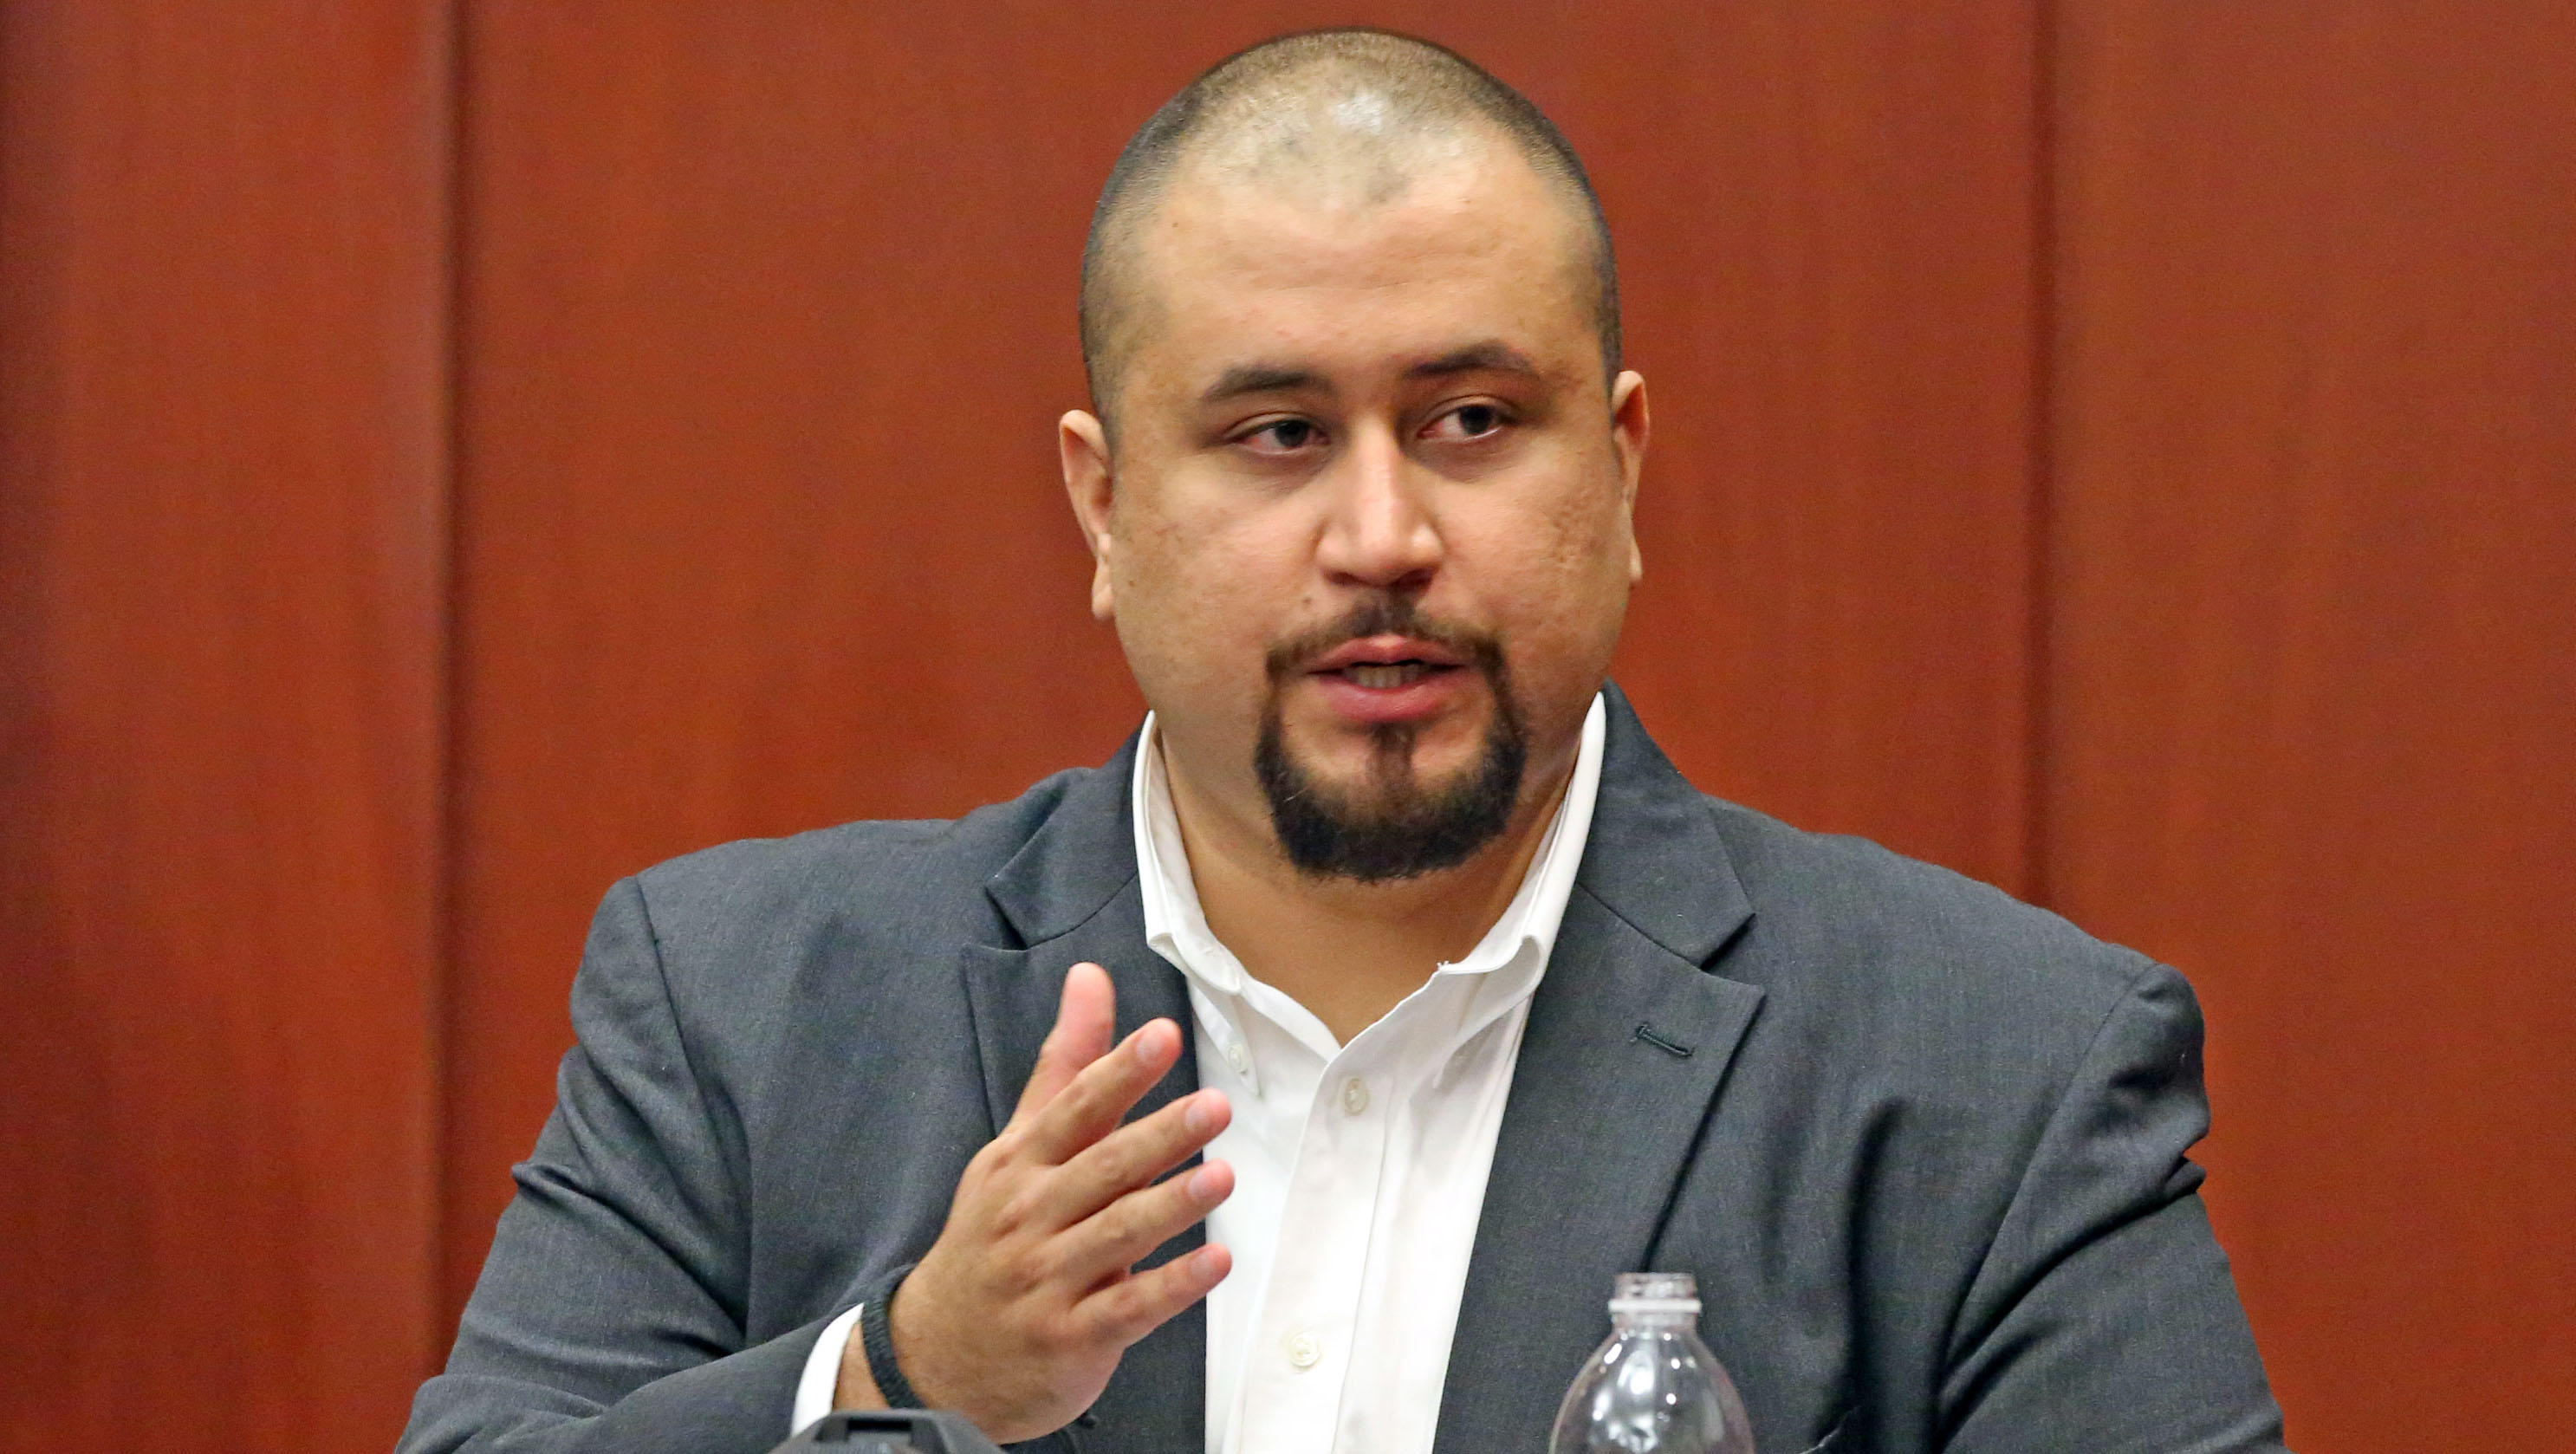 George Zimmerman testifies Matthew Apperson shot at him in on-road confrontation - CBS ...2973 x 1678